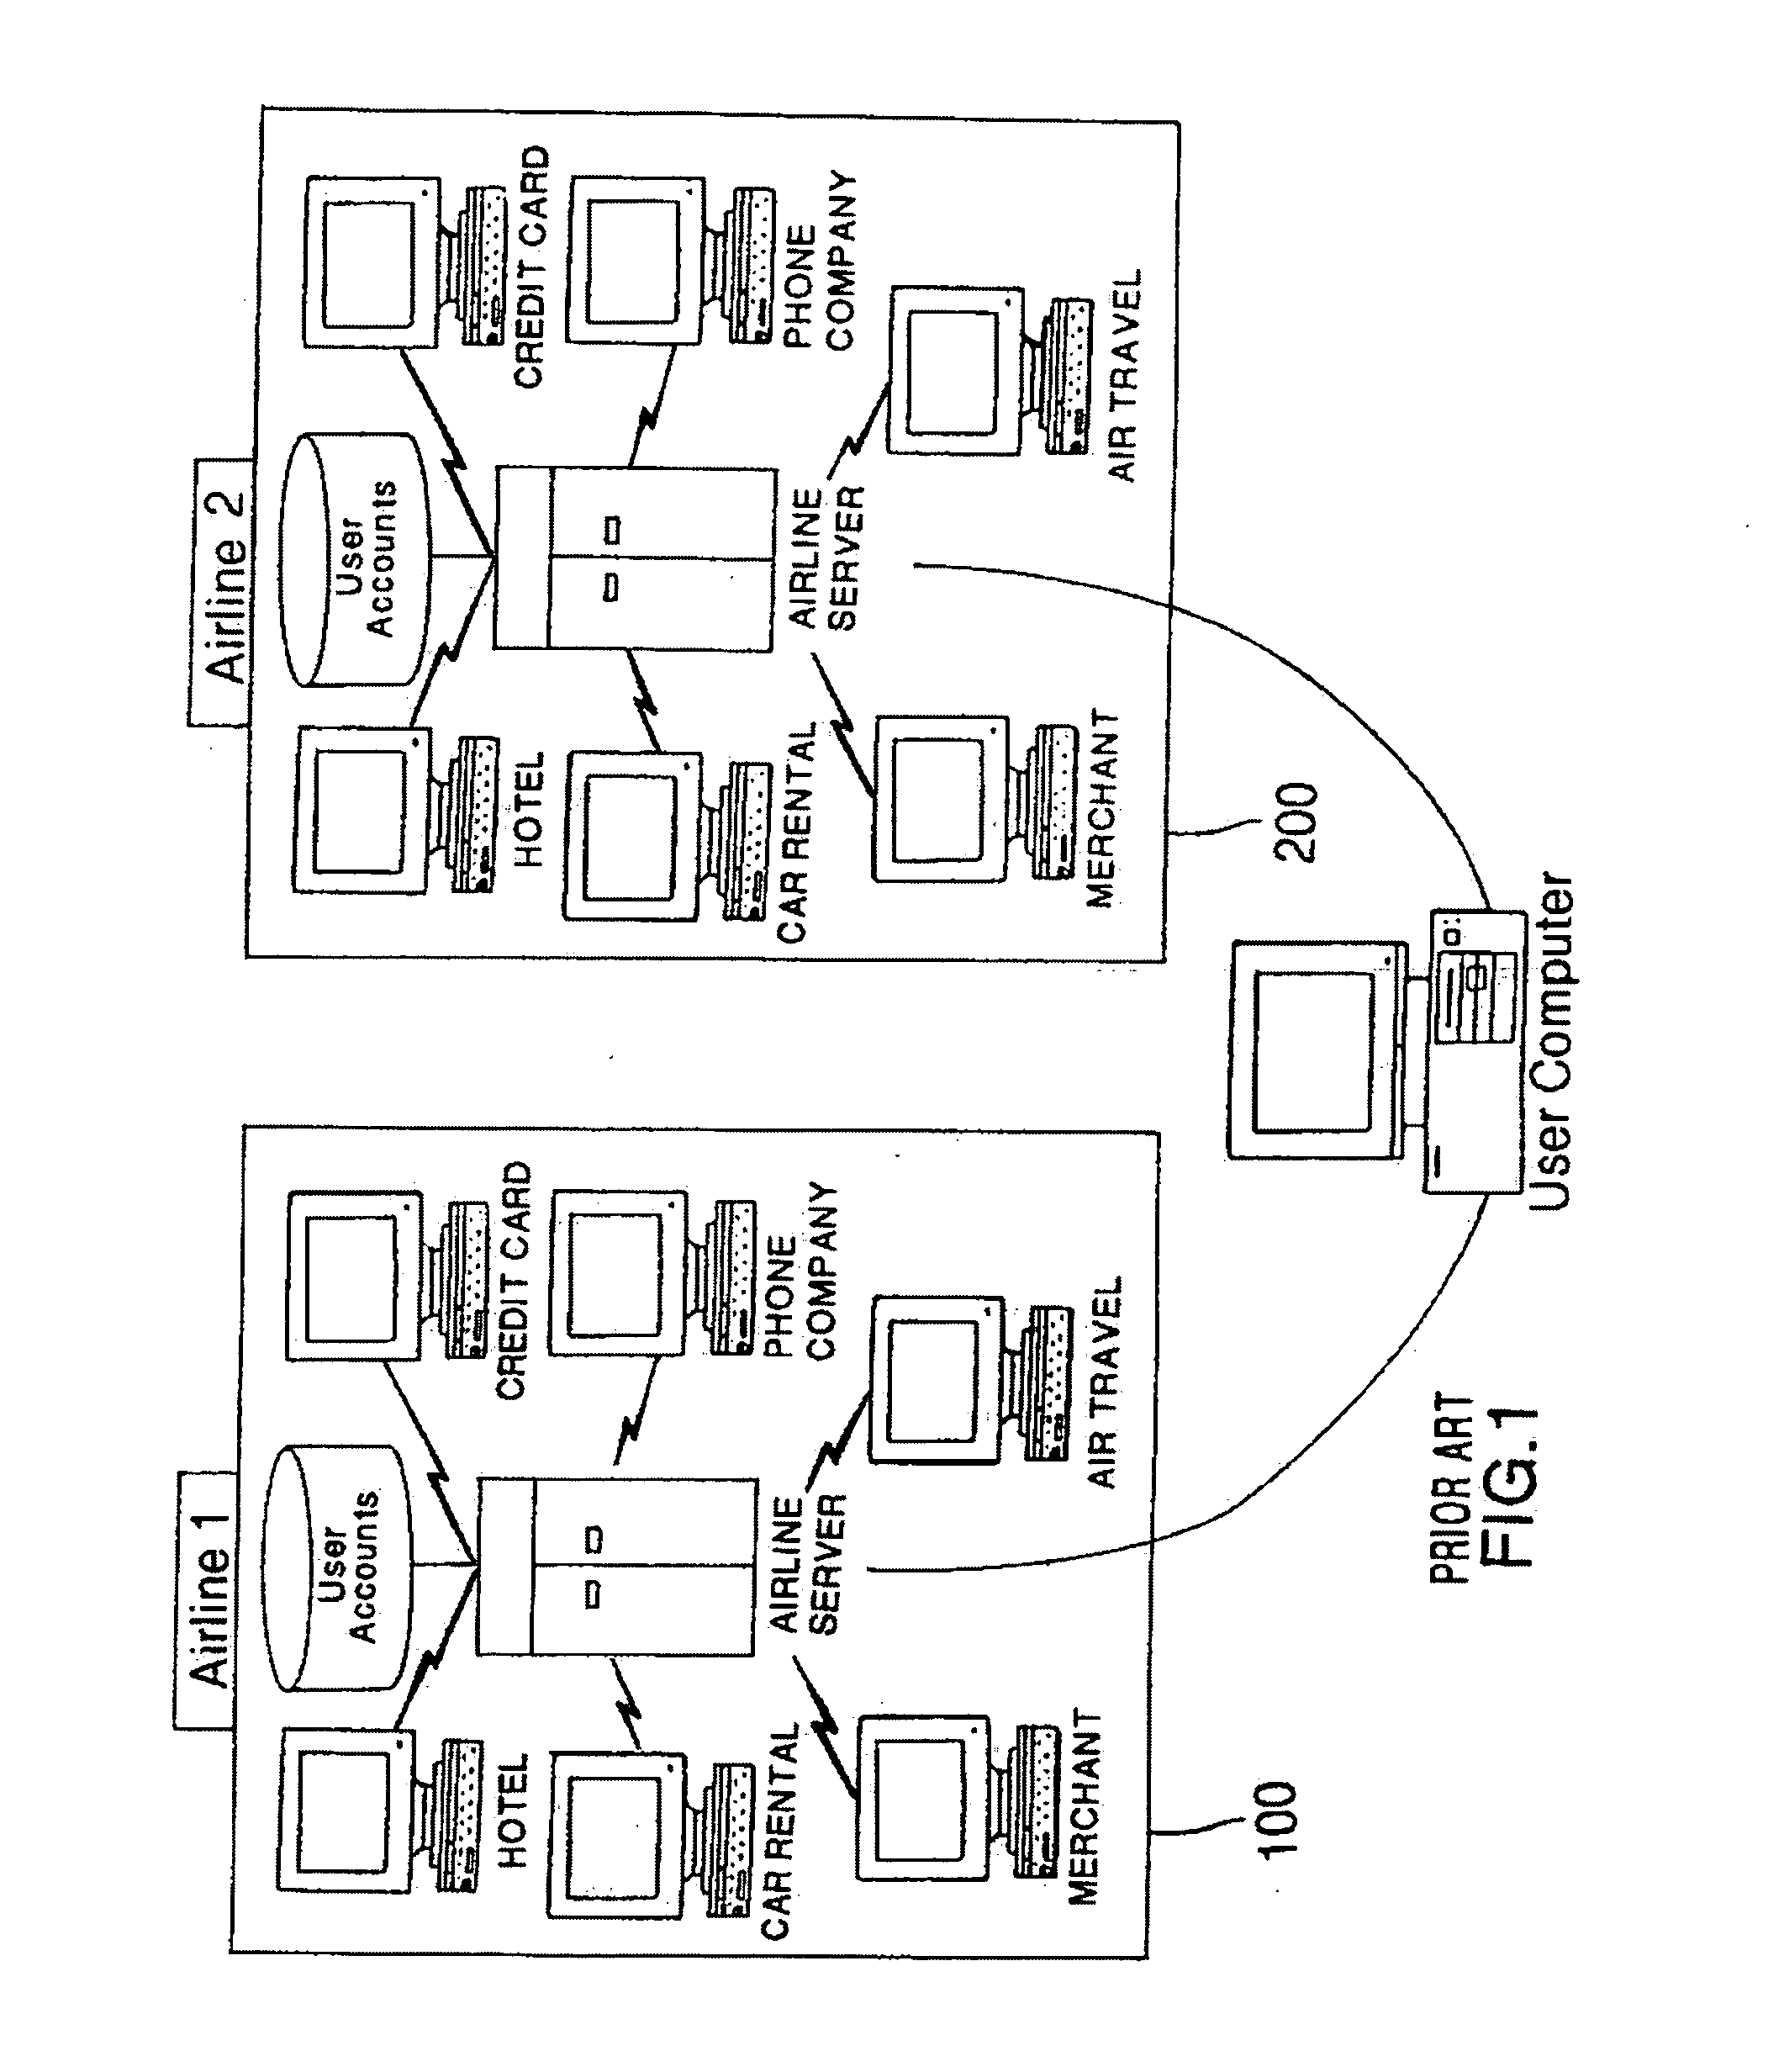 Method and system for issuing, aggregating and redeeming points based on merchant transactions